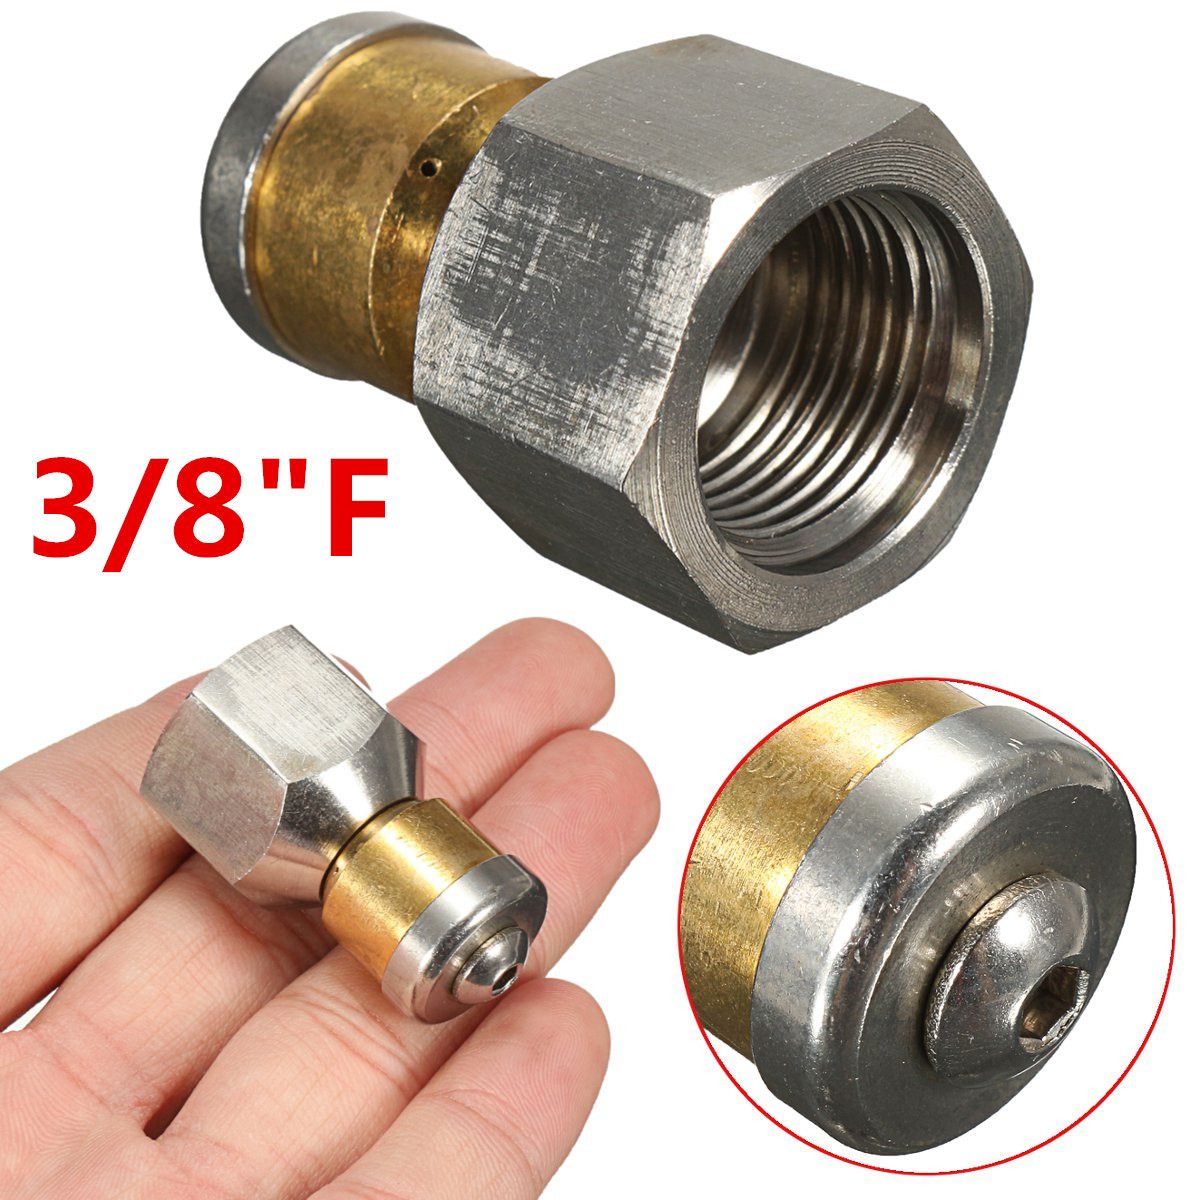 Steel Pressure Washer Drain Sewer Cleaning Pipe Jetter Rotary Nozzle 1/4"F 3 Jet